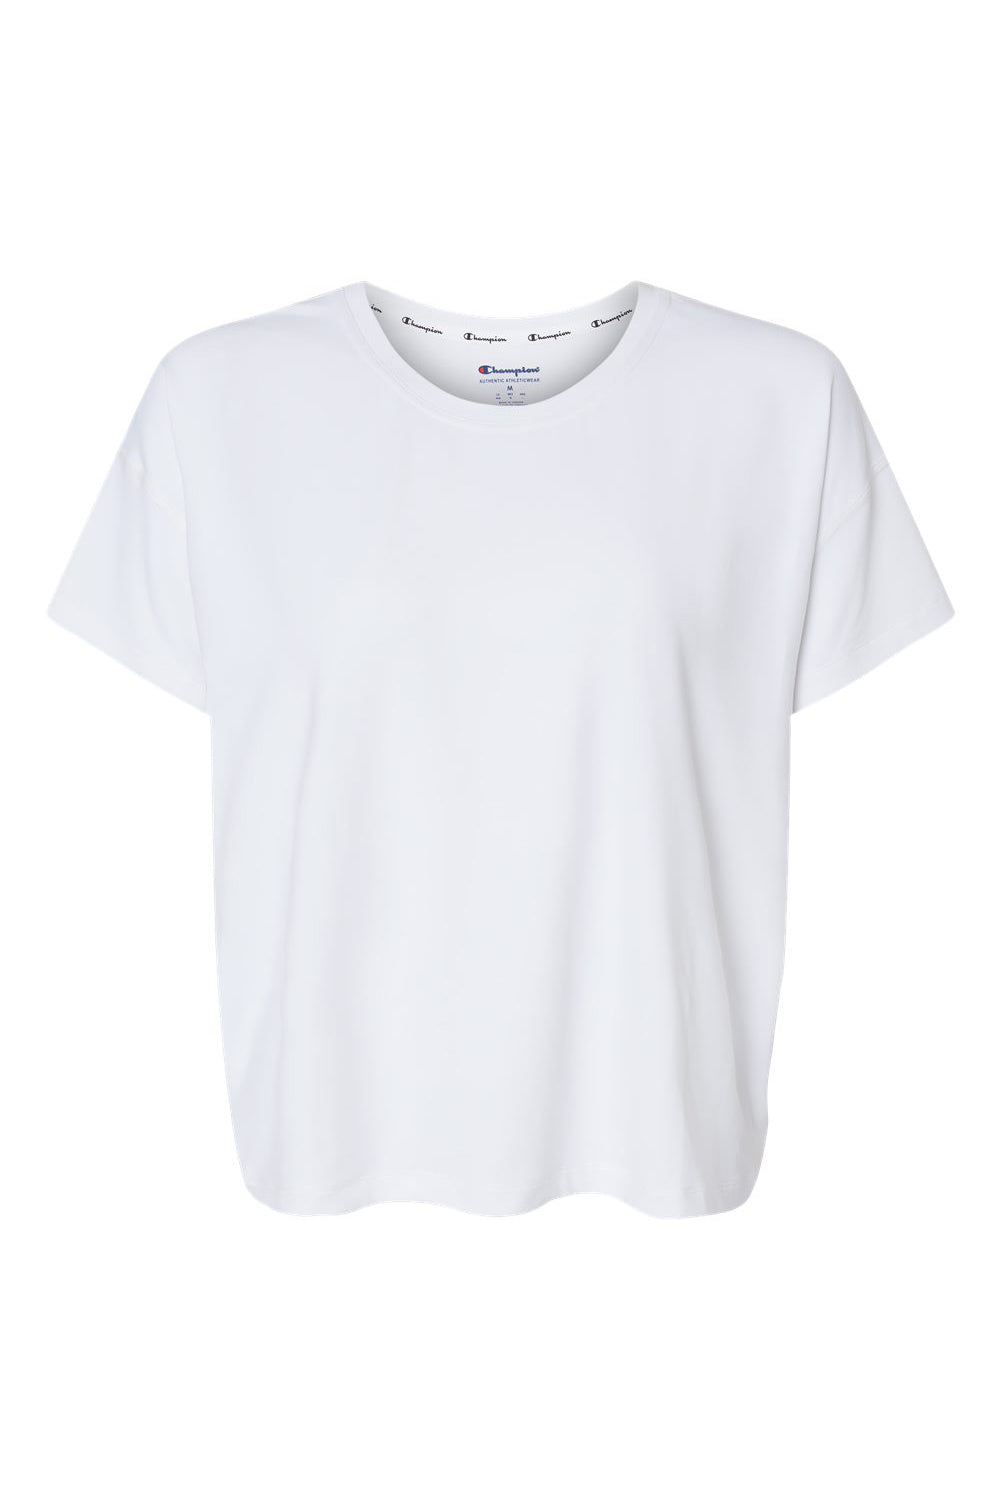 Champion CHP130 Womens Sport Soft Touch Short Sleeve Crewneck T-Shirt White Flat Front